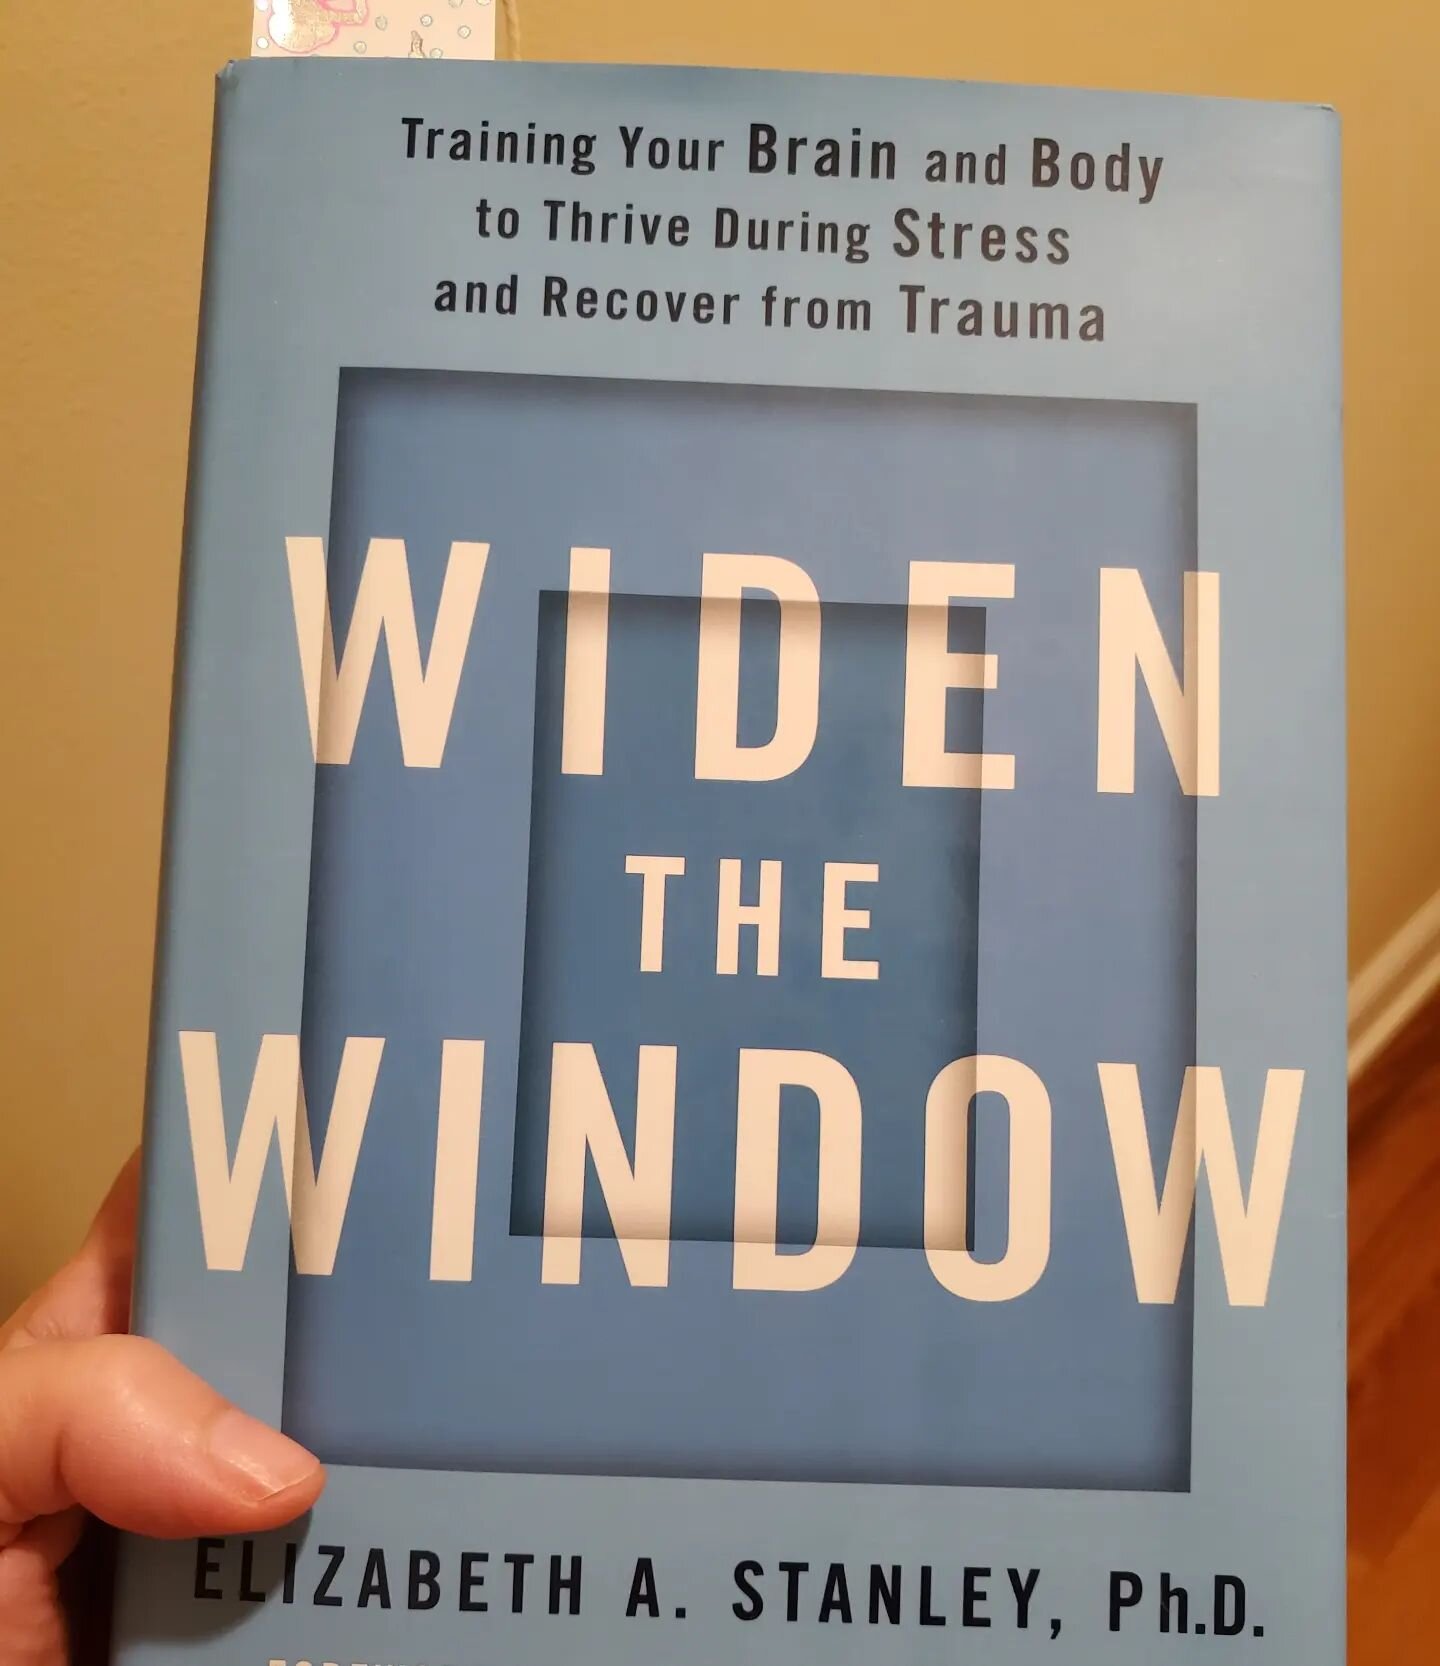 This book is brilliant. 

So much respect for SEP colleague Elizabeth Stanley.

&quot;Whenever our thinking brain refuses to acknowledge emotions it doesn't want, however, we perpetuate the adversarial relationship. In the process, we move ourselves 